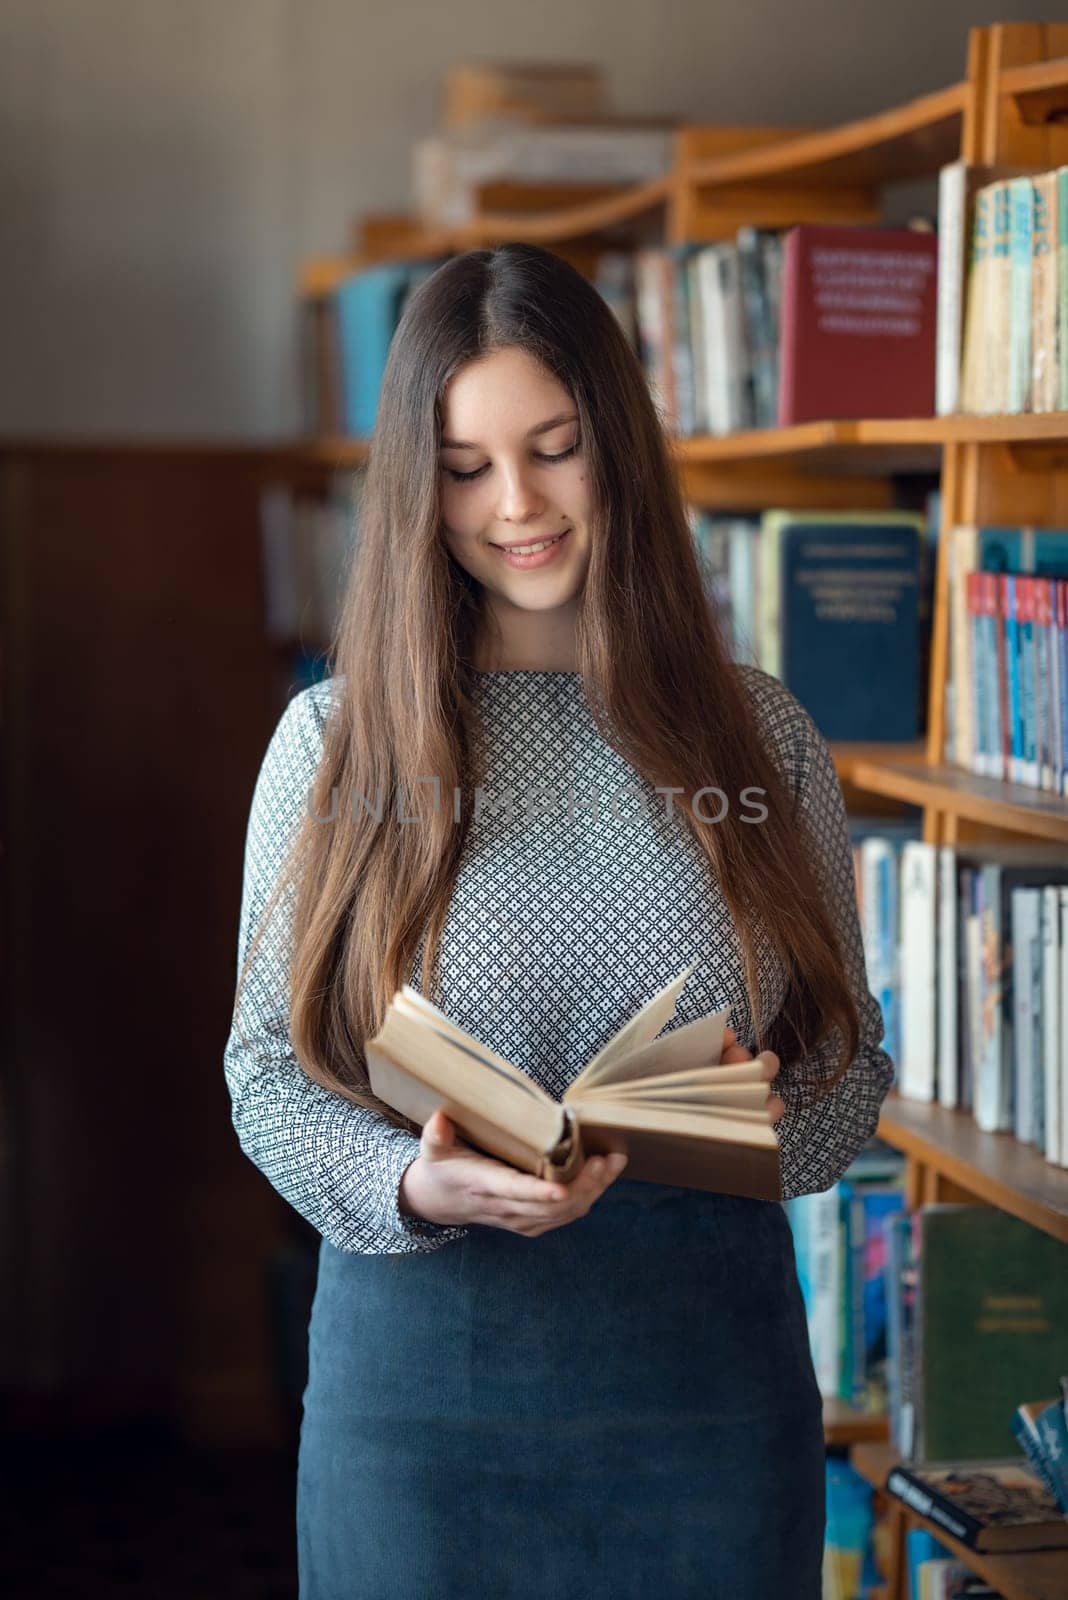 Cheerful high school female student reading book in library by VitaliiPetrushenko